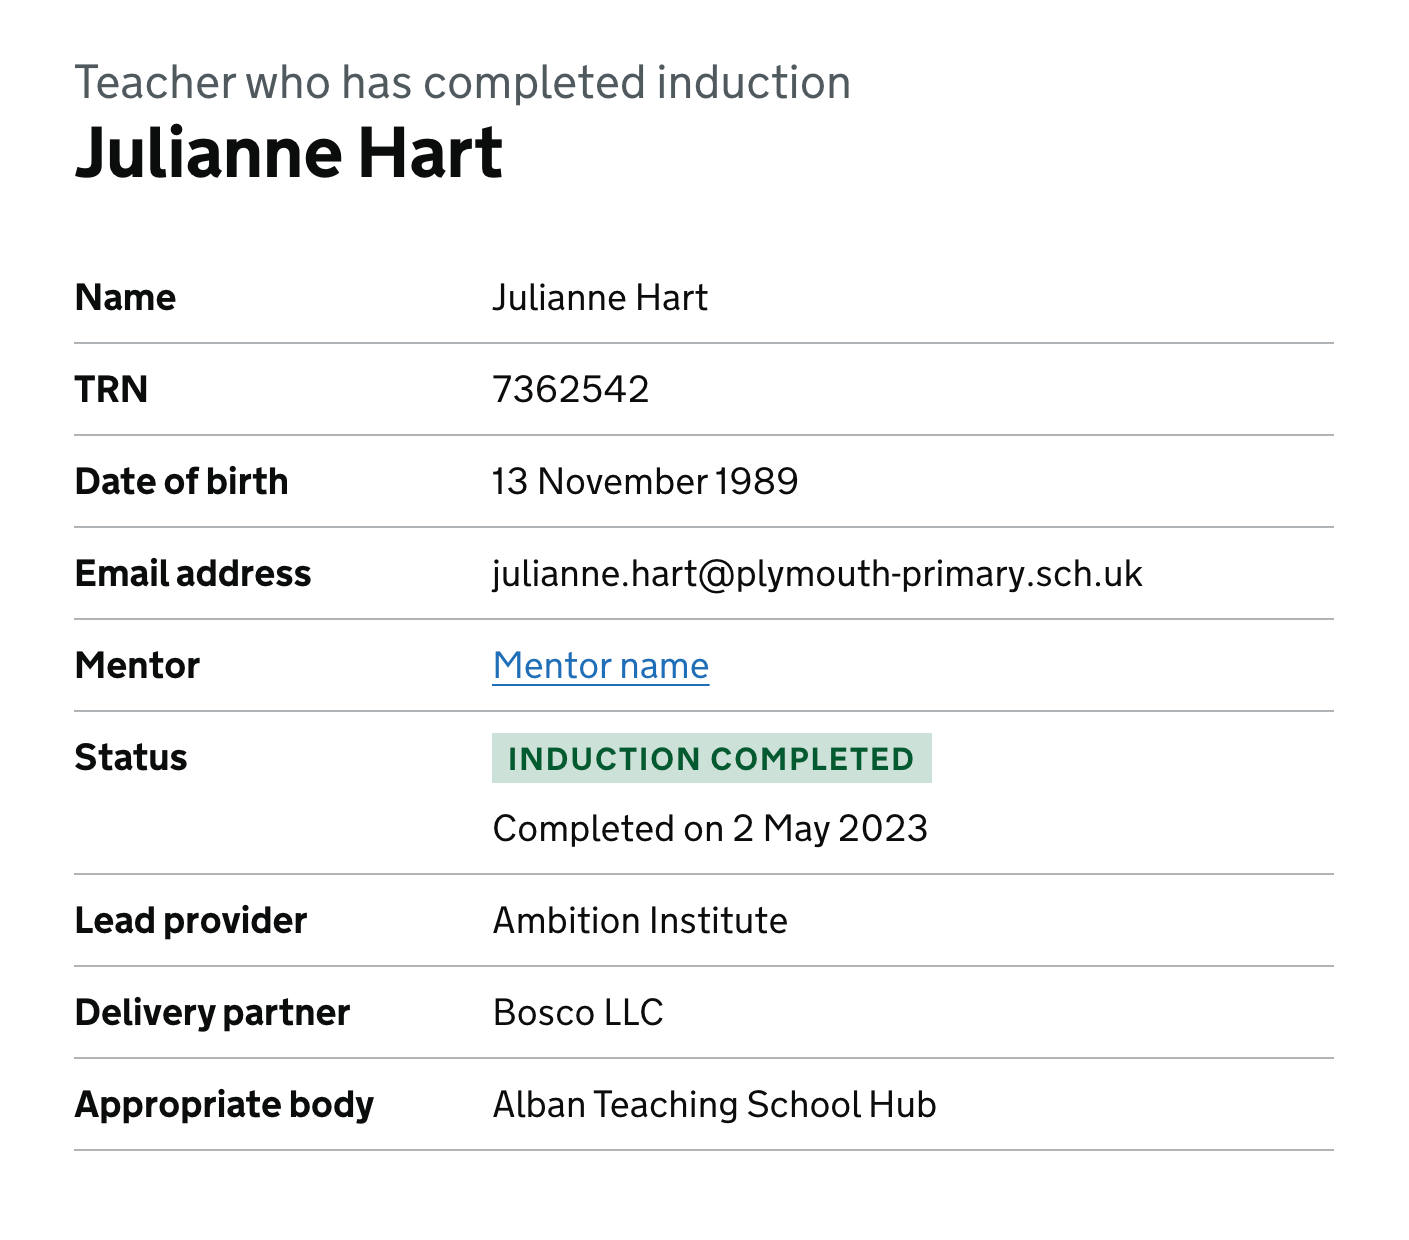 Screenshot showing the detail of a summary list for a teacher who has completed their induction, with rows for name, TRN, date of birth, email address, mentor, status, lead provider, delivery partner and appropriate body.